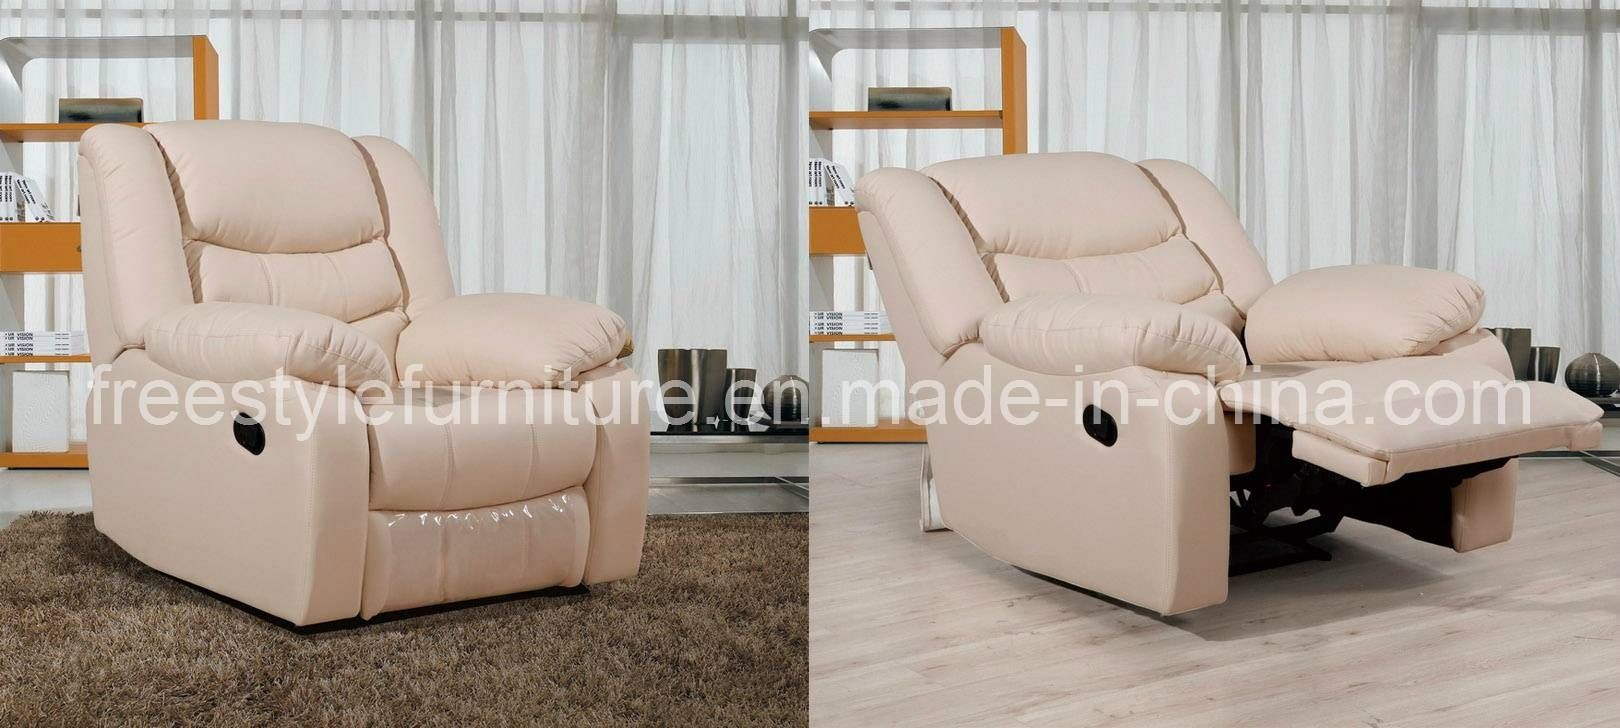 Sofas Center : Rocking Sofa Chair For Baby Chairs Targetsofa Inside Rocking Sofa Chairs (View 1 of 30)